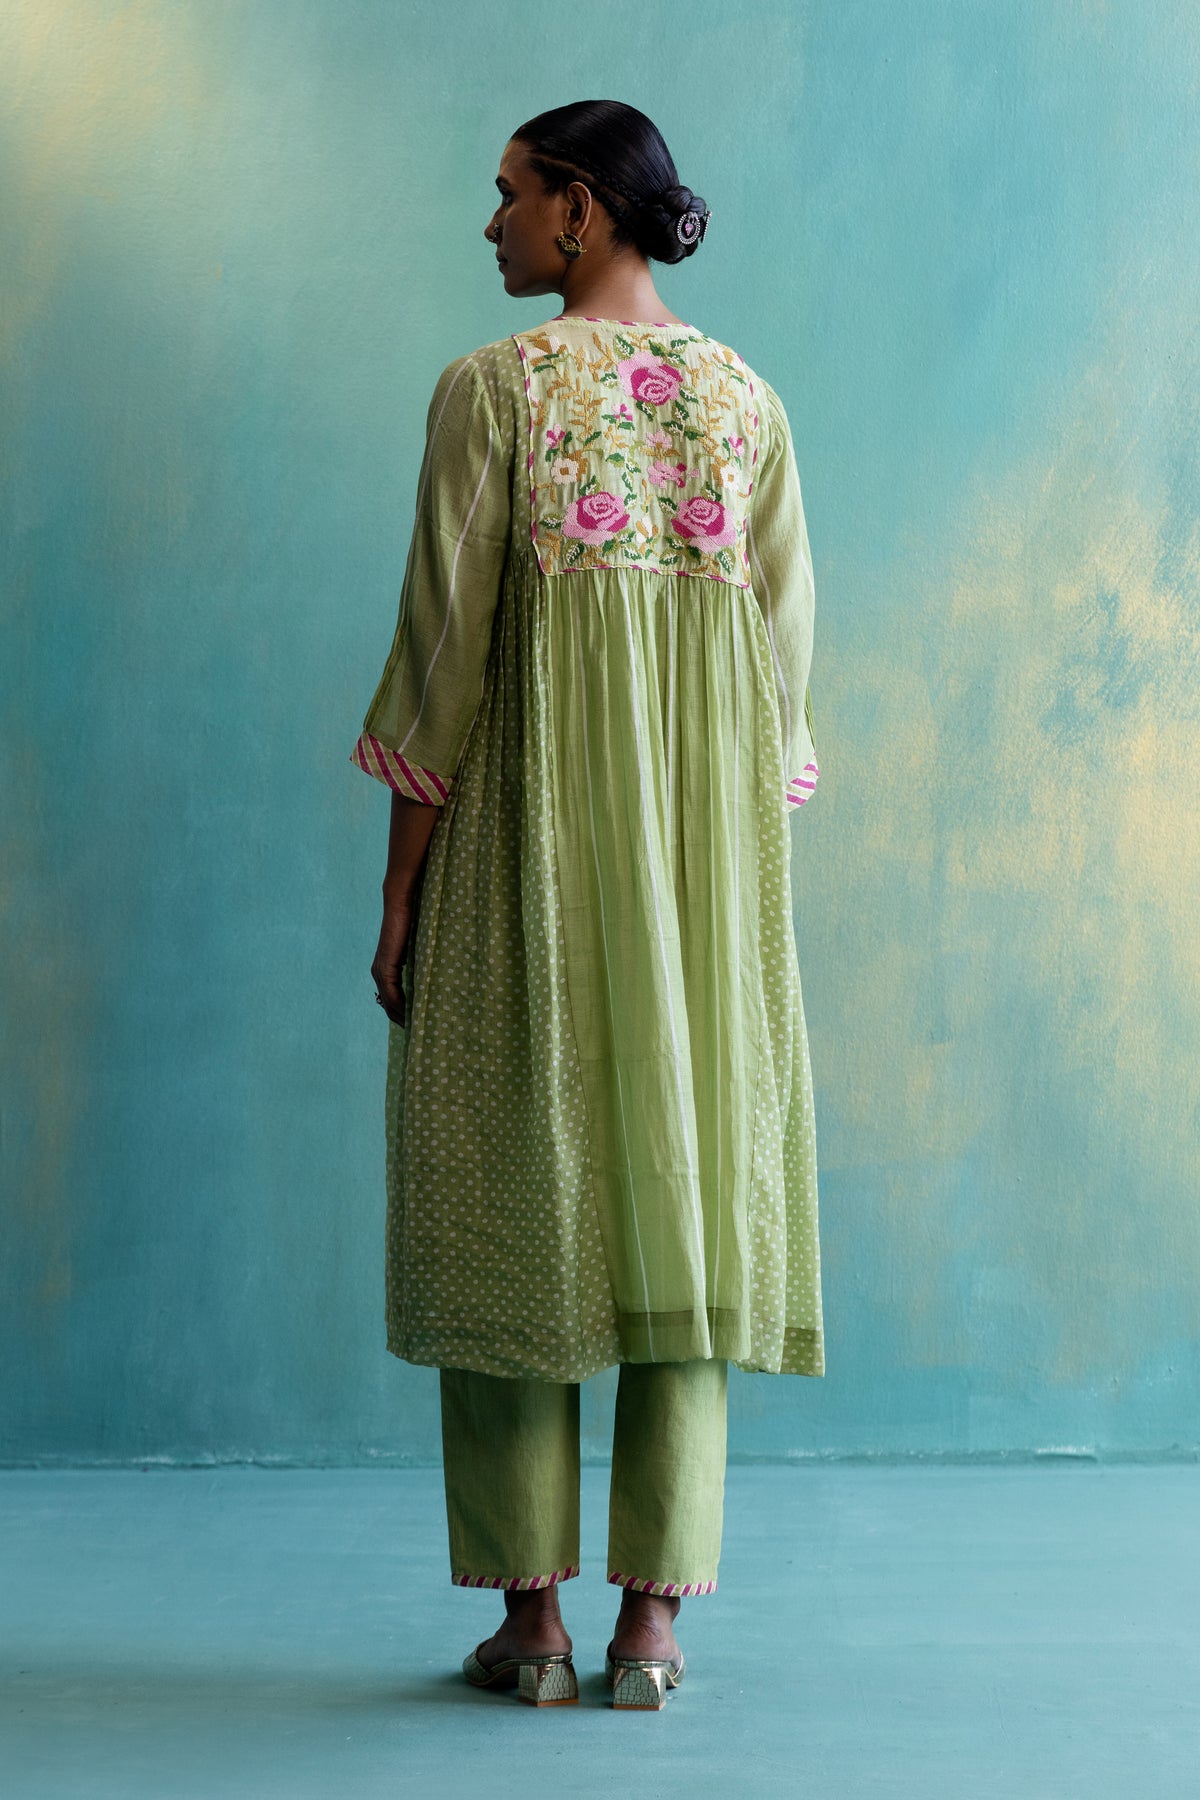 DIL-KASH OLIVE GREEN CHANDERI FRONT AND BACK FLORAL EMBROIDERY WITH SIDE PLEATS AND POLKAS CHANDERI KURTA